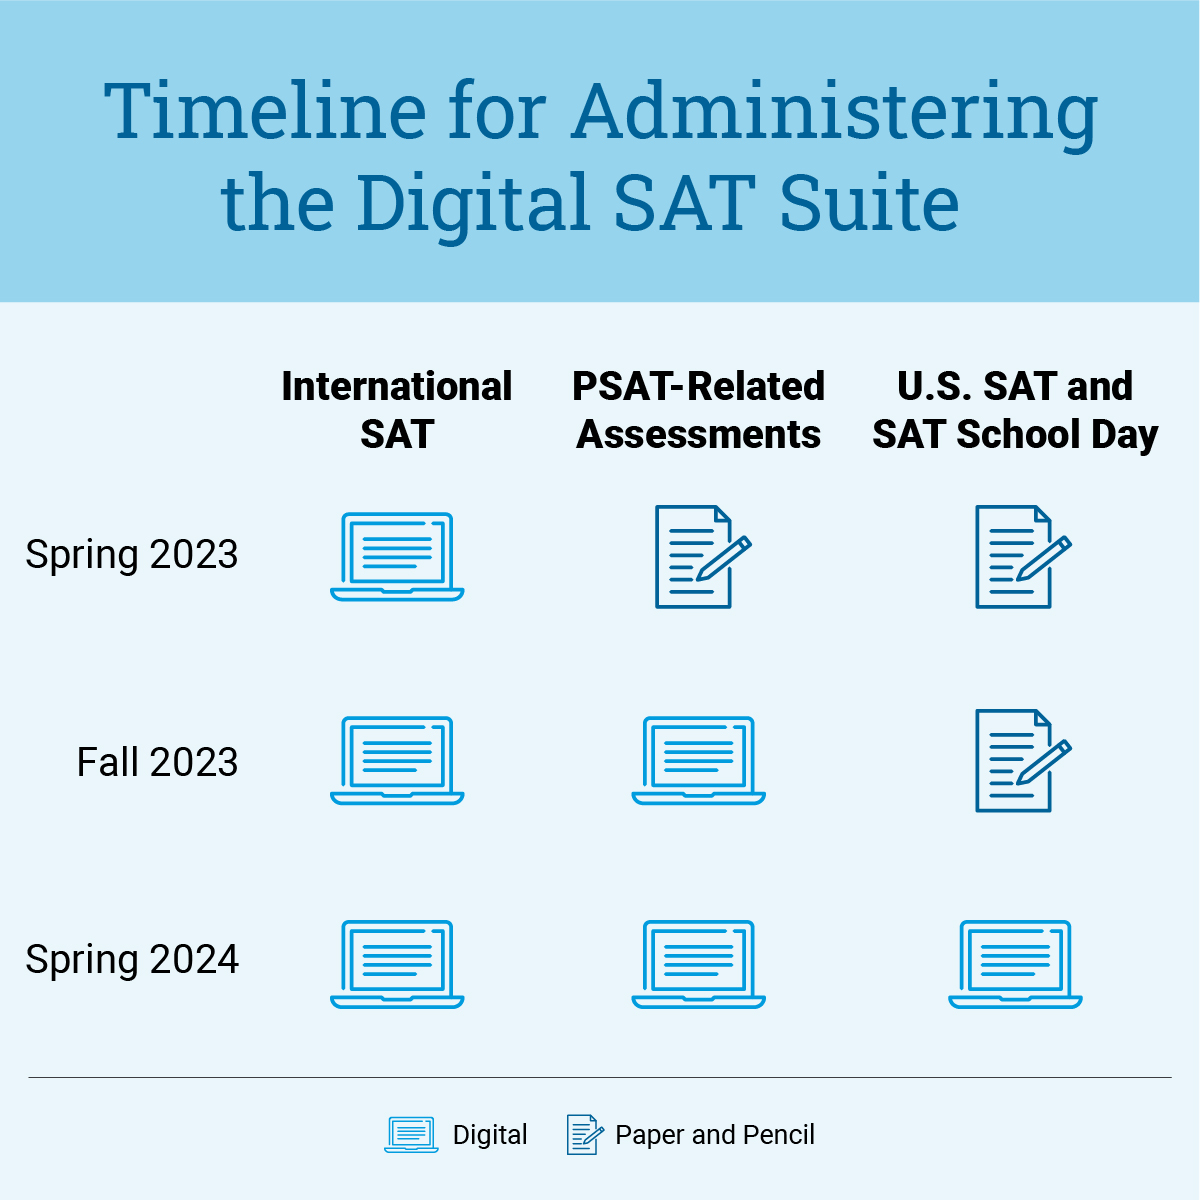 Schedule for administering the digital SAT suite.